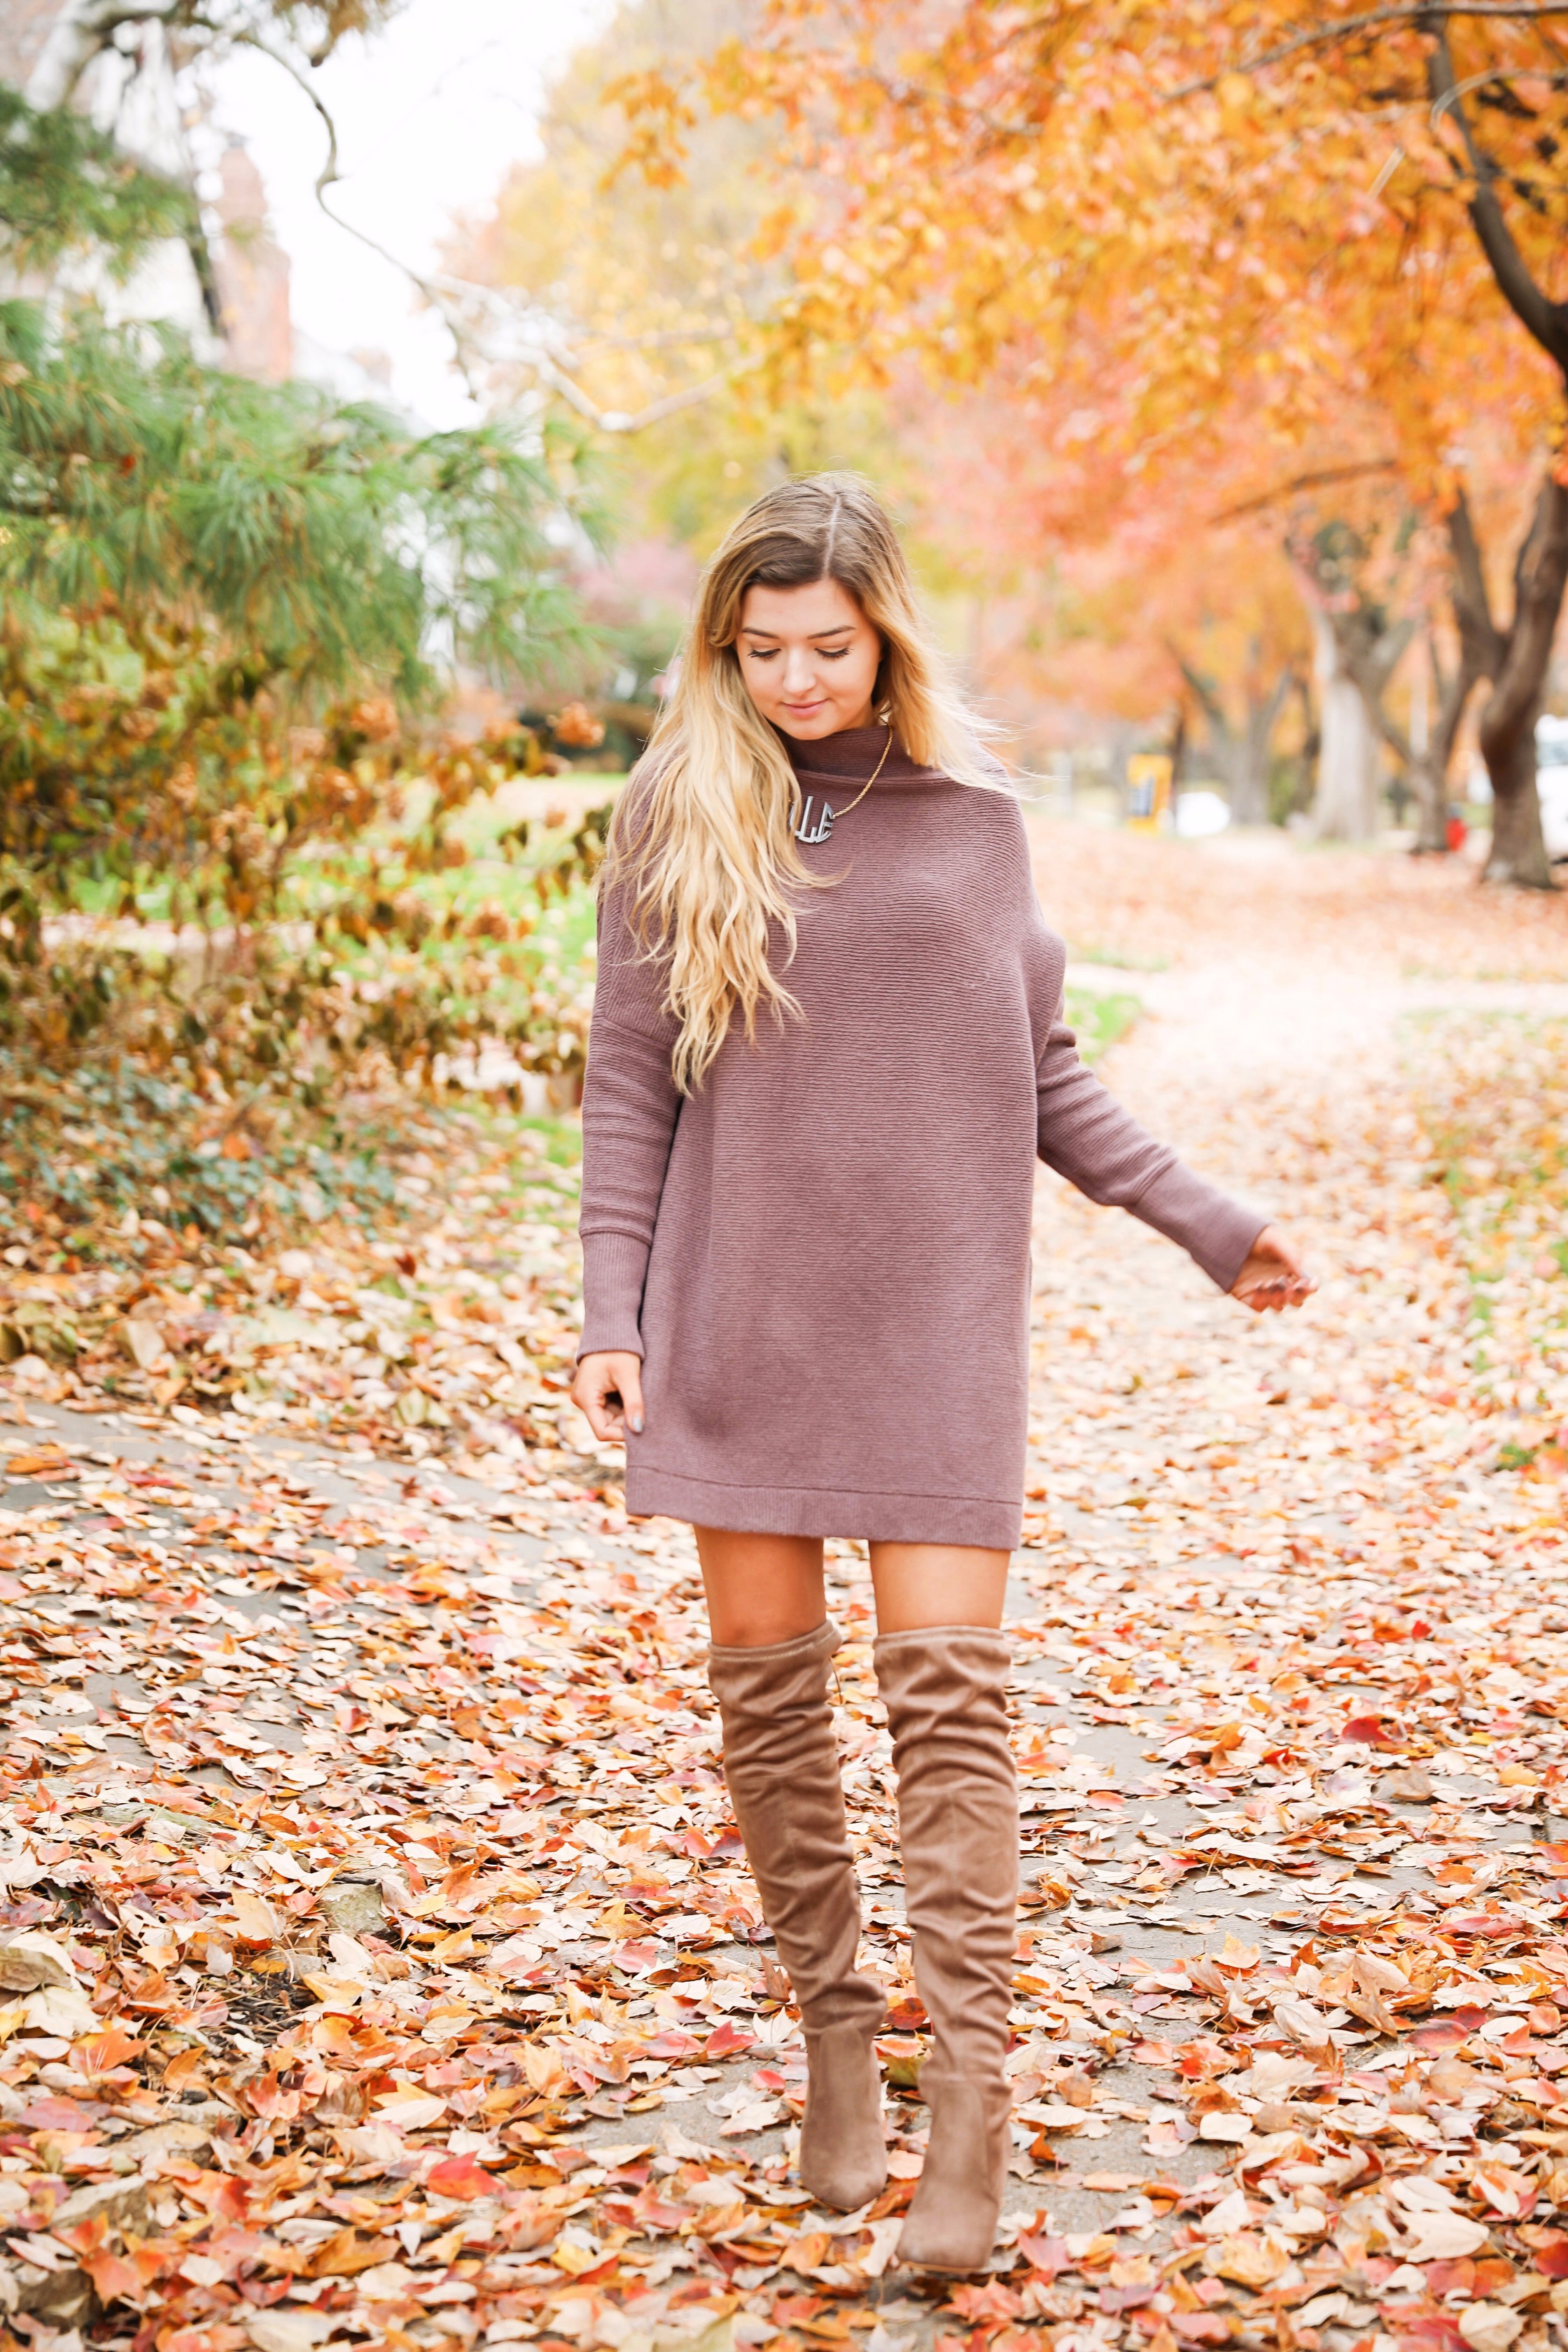 Thanksgiving Outfit Ideas on Fashion Blog Daily Dose of Charm by Lauren Lindmark